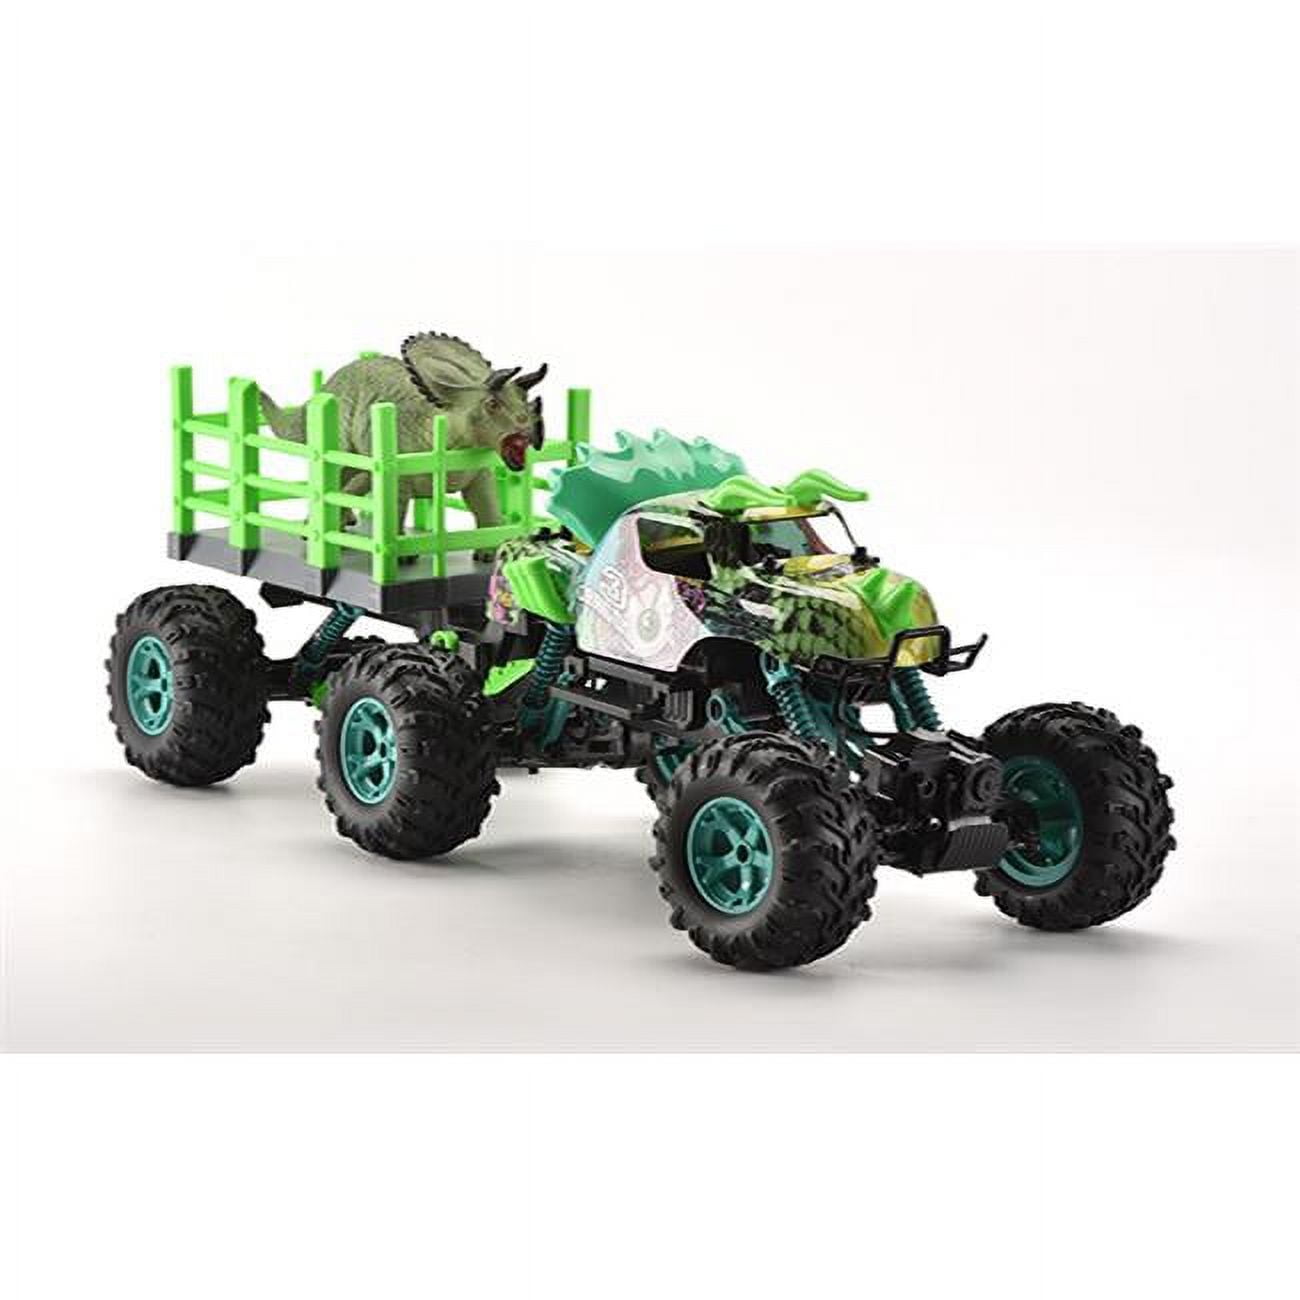 Picture of CIS-Associates 333-ZL21141 2.4G Scale 1-12 Dinosaur Truck with Trailer, Green